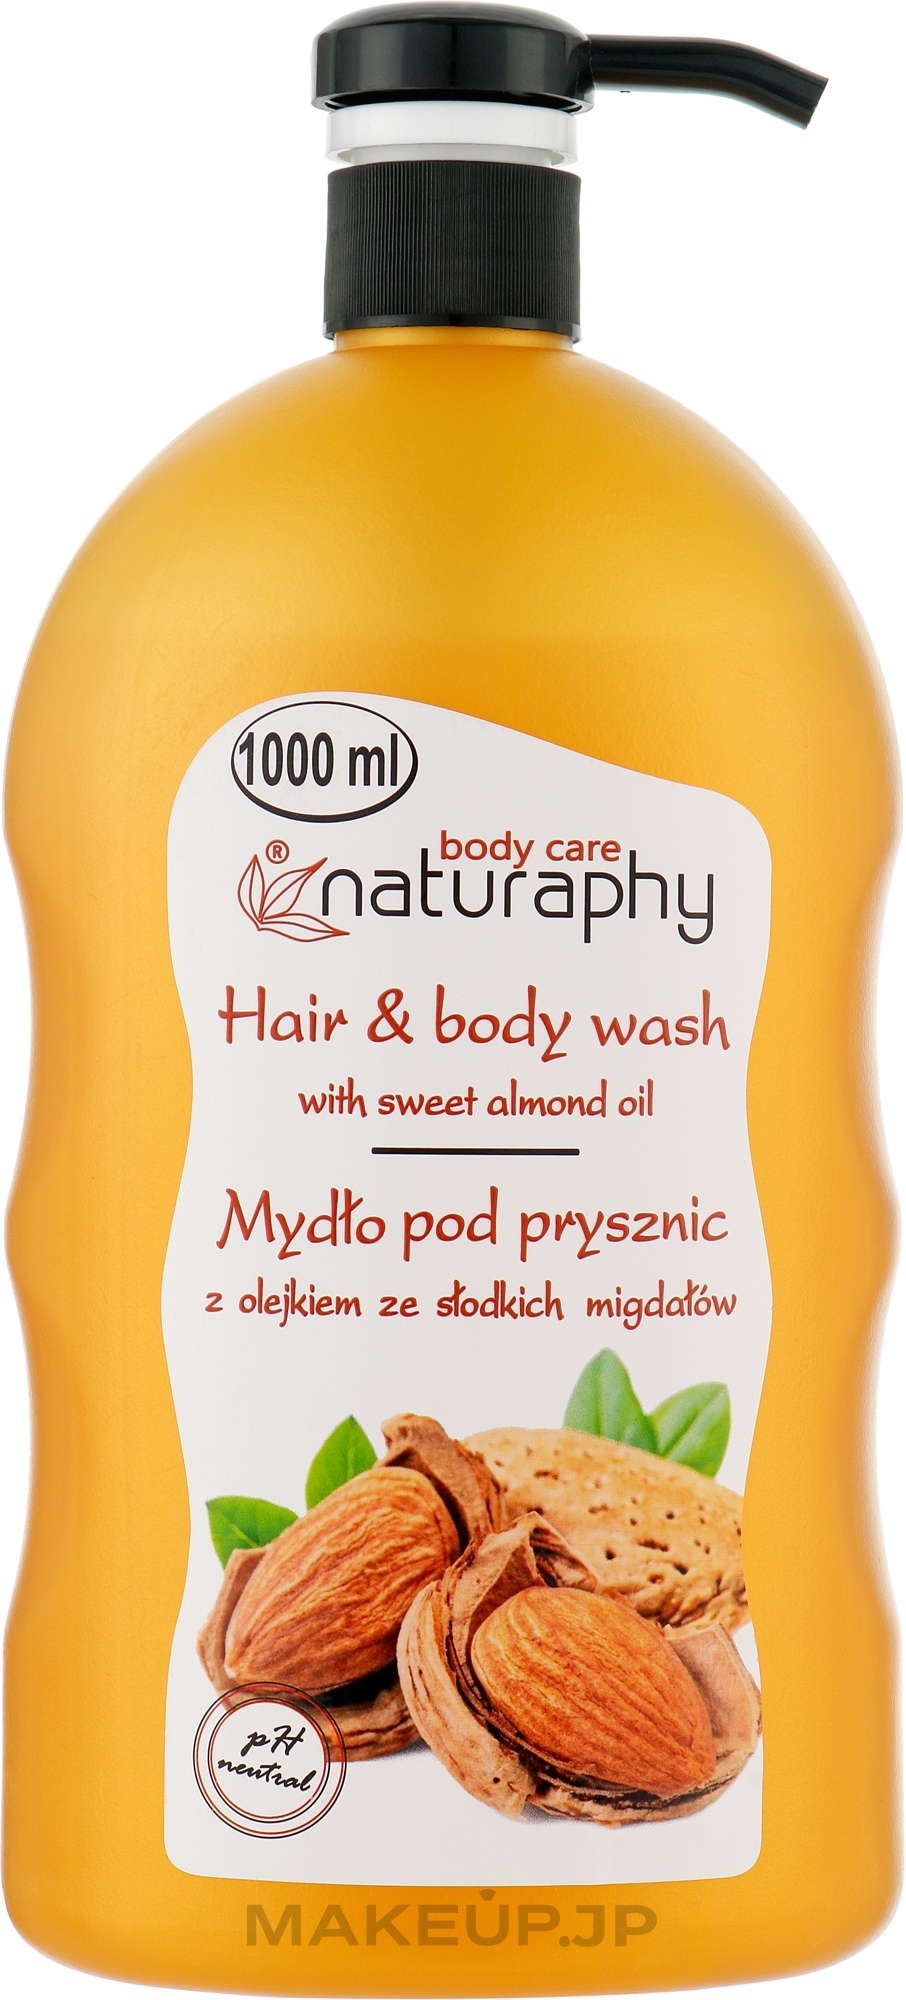 Shampoo-Shower Gel with Almond Oil - BluxCosmetics Naturaphy Hair & Body Wash with Sweet Almond Oil — photo 1000 ml